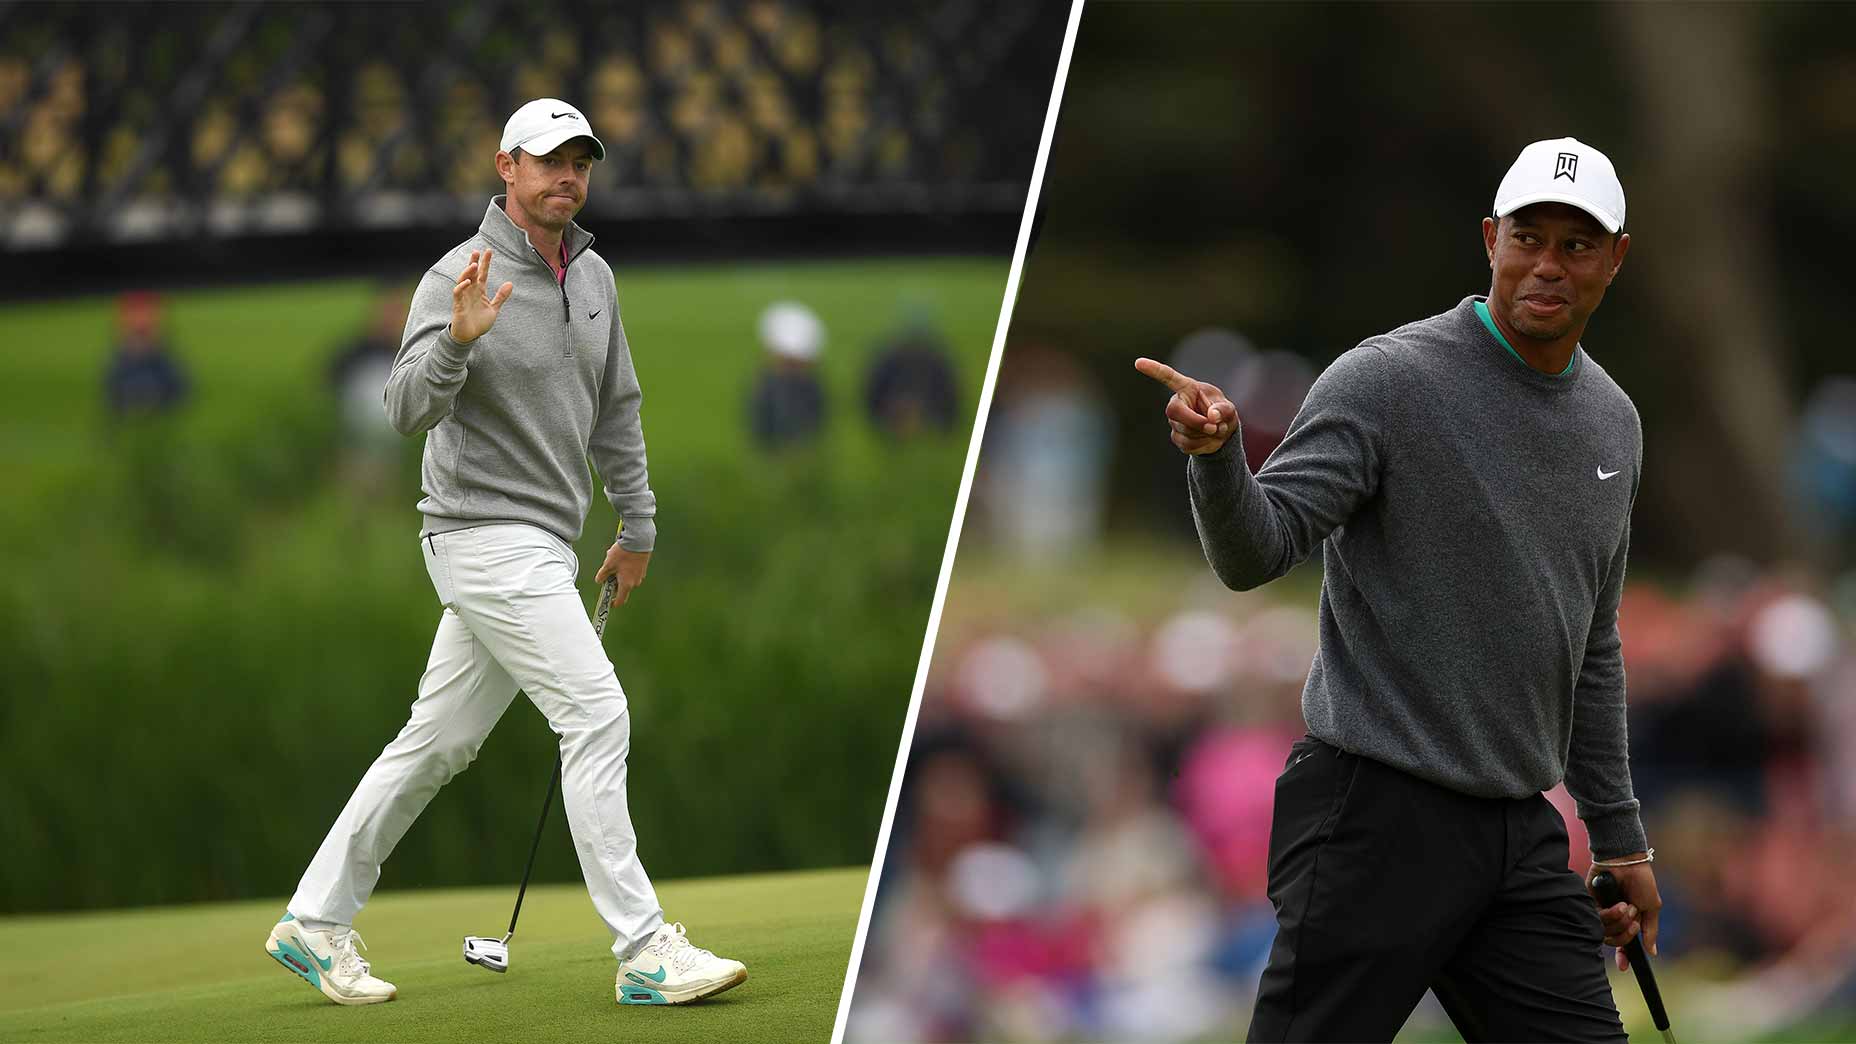 Tiger Woods and Rory McIlroy's Open prep? An all-time buddies' trip